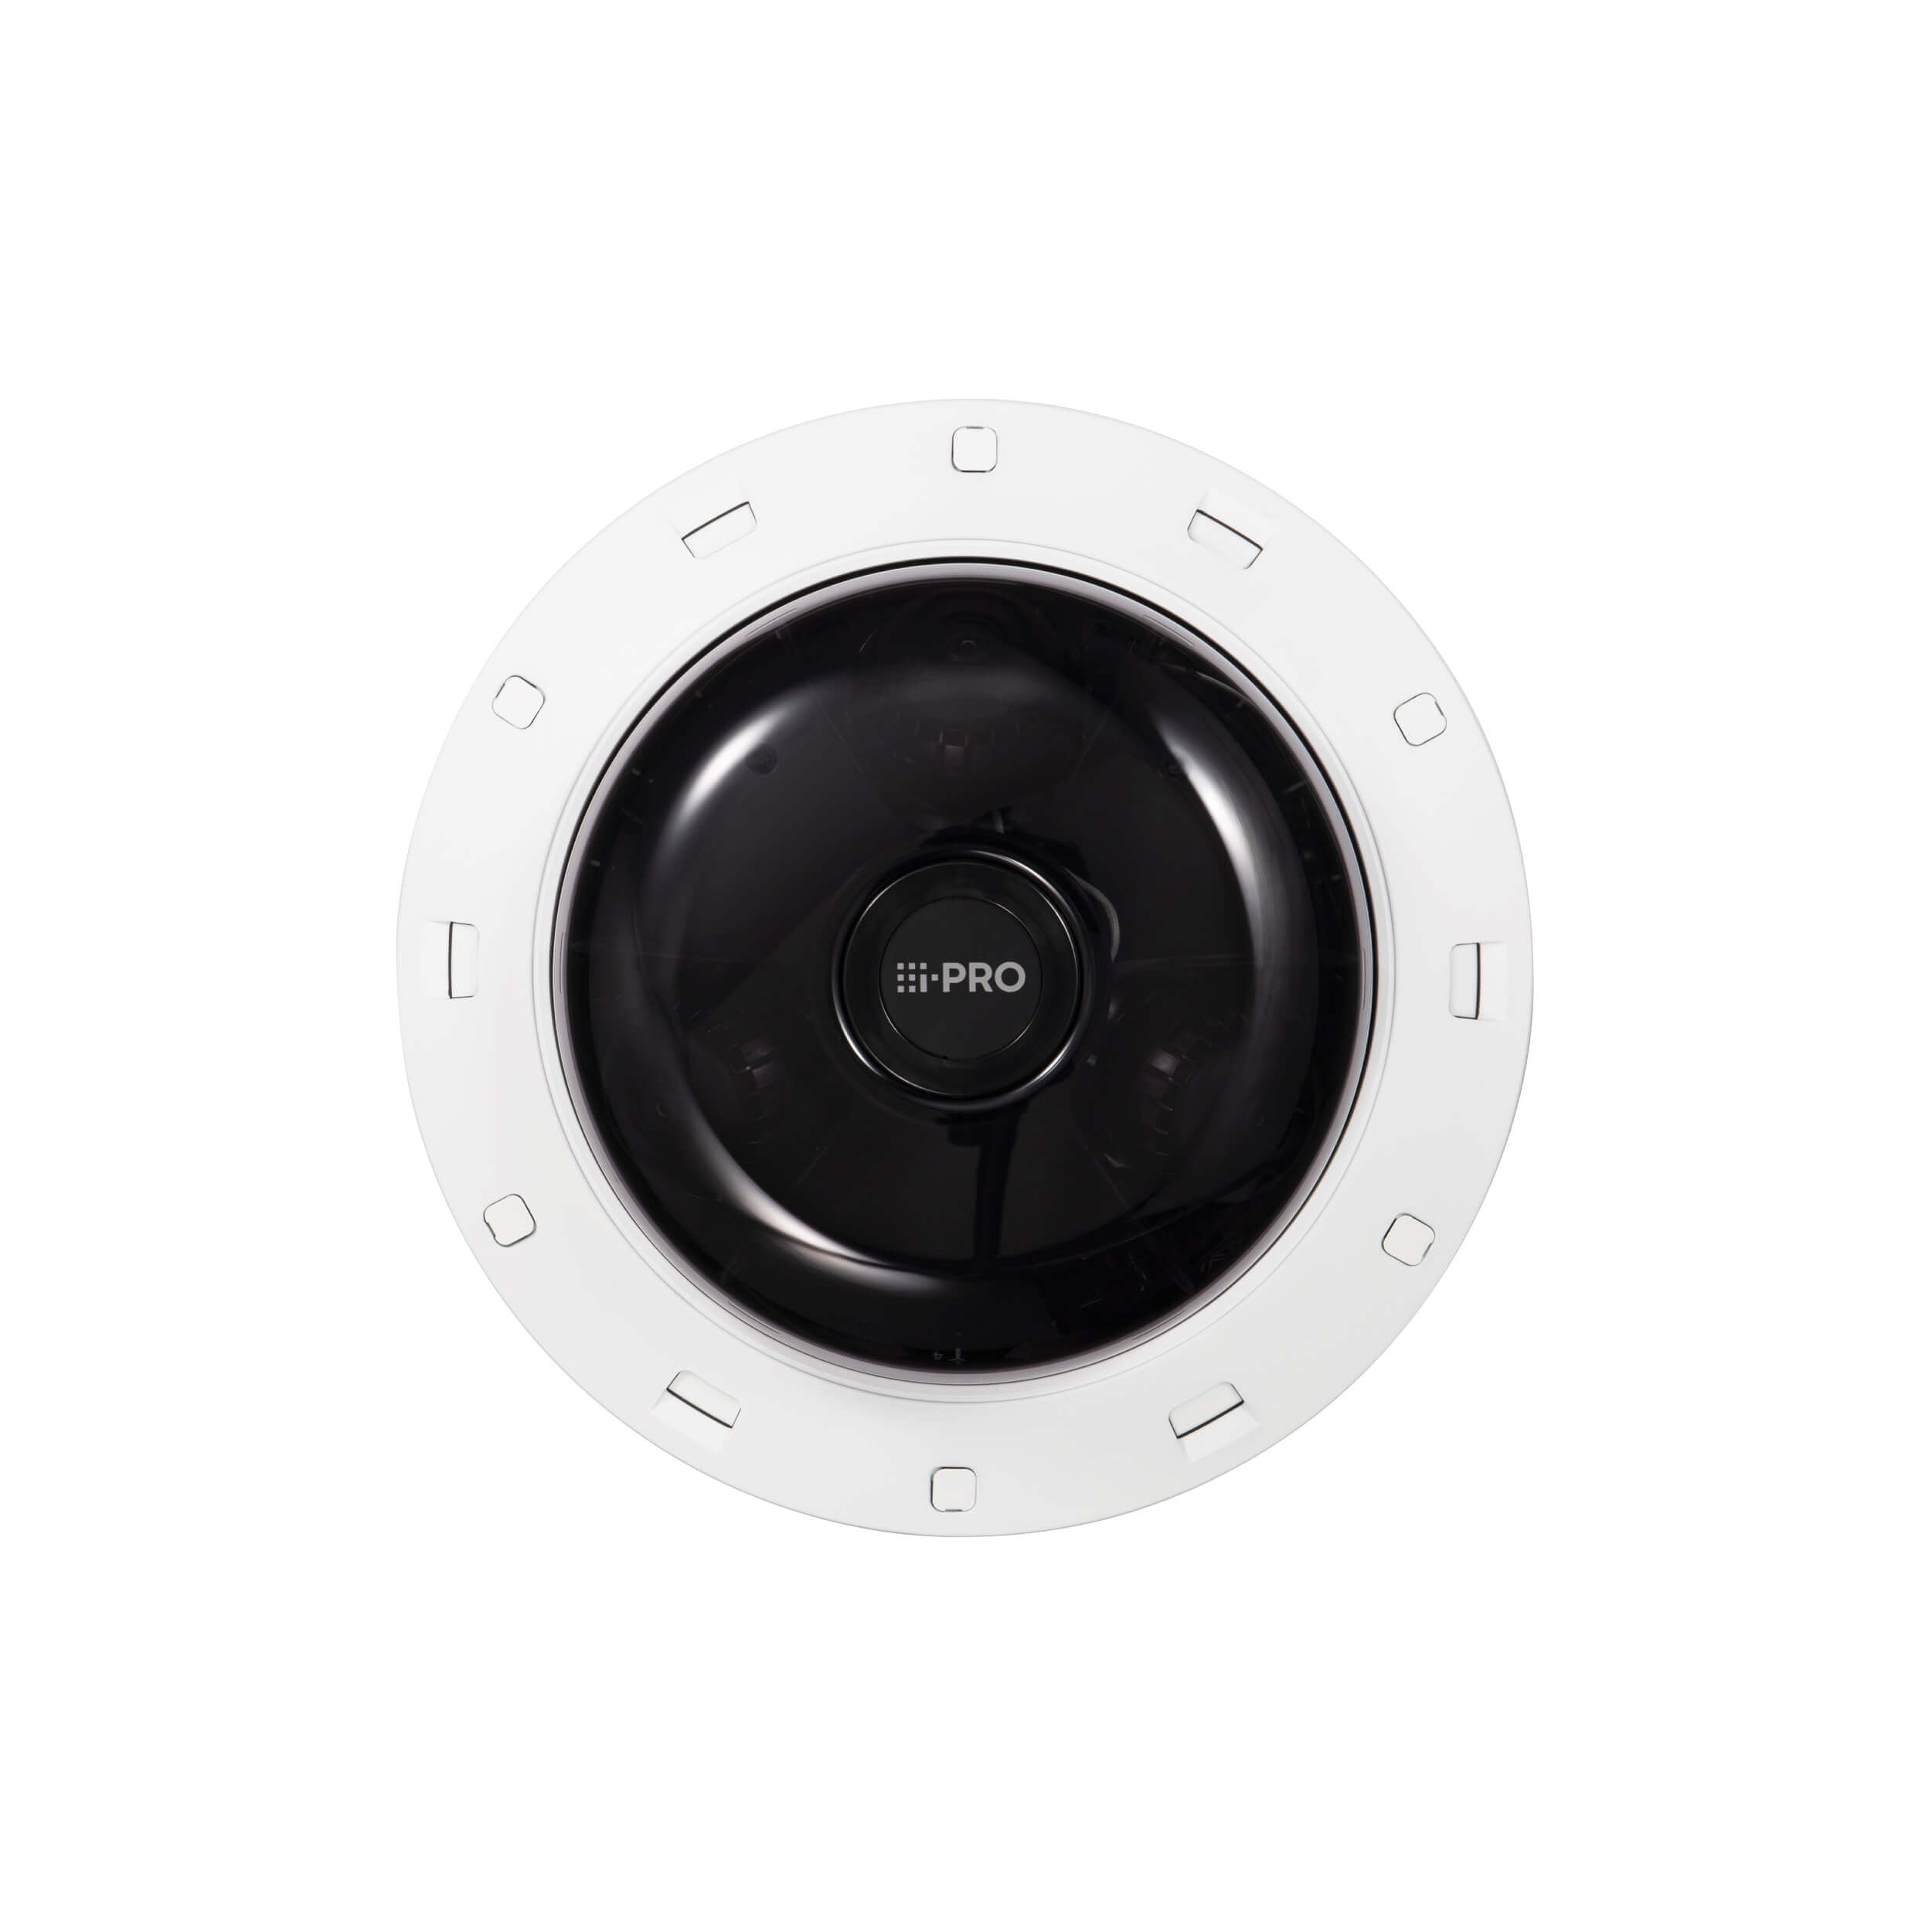 Panasonic WV-S8564L Industry thinnest multi-directional cameras